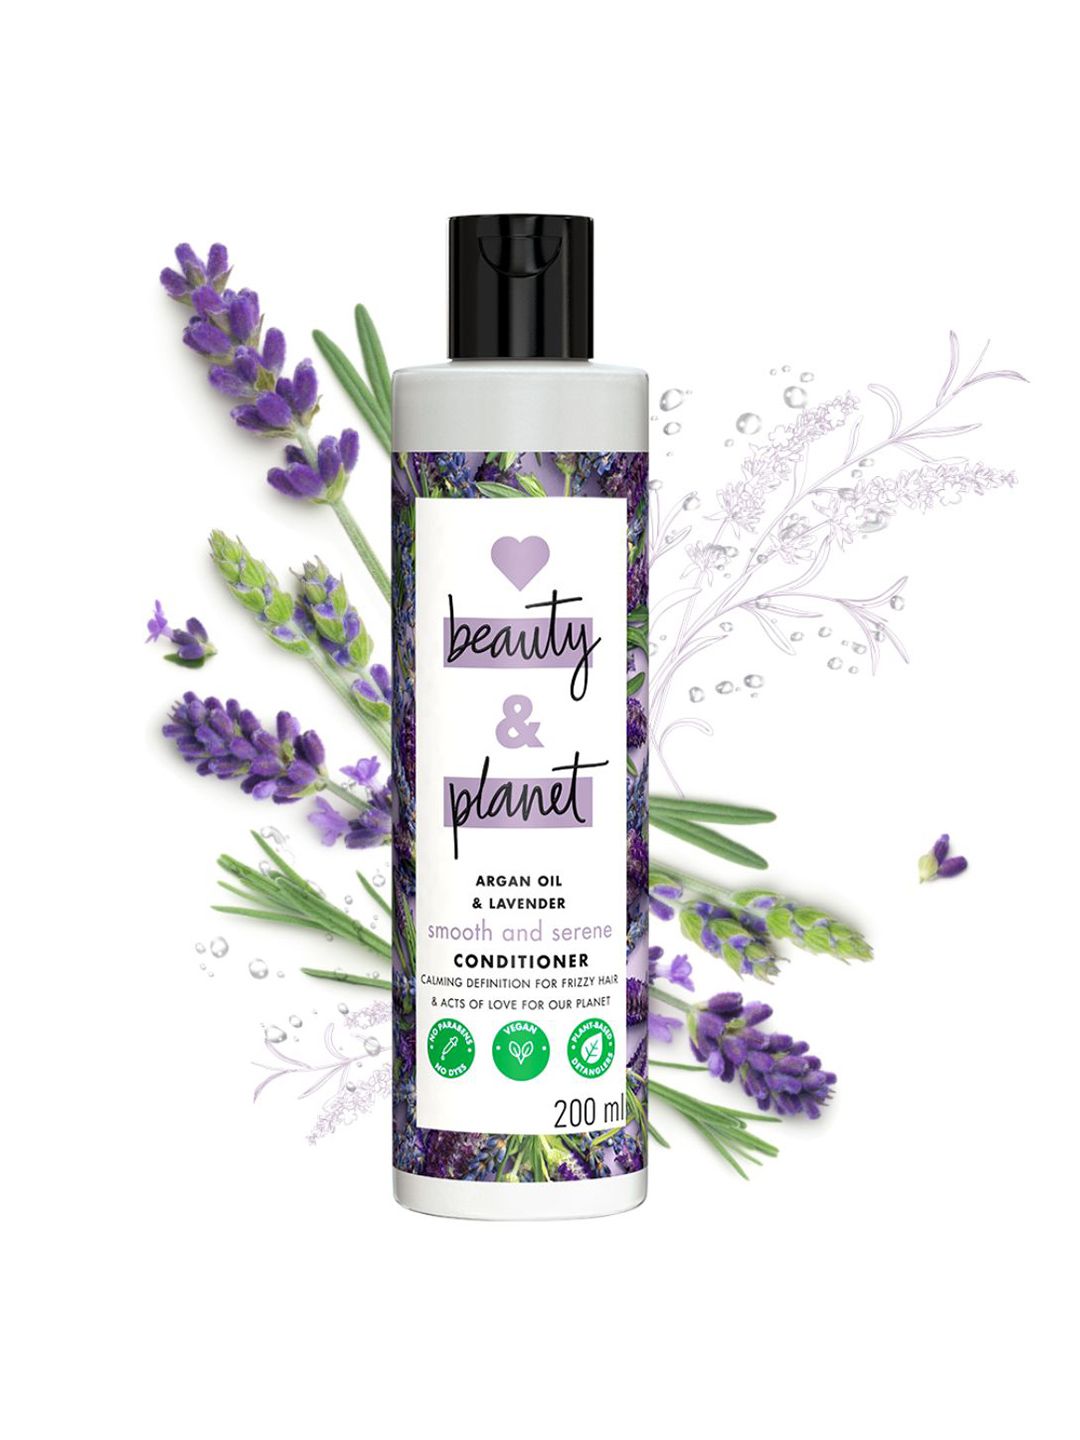 Love Beauty & Planet Smooth and Serene Conditioner with Argan Oil & Lavender 200 ml Price in India